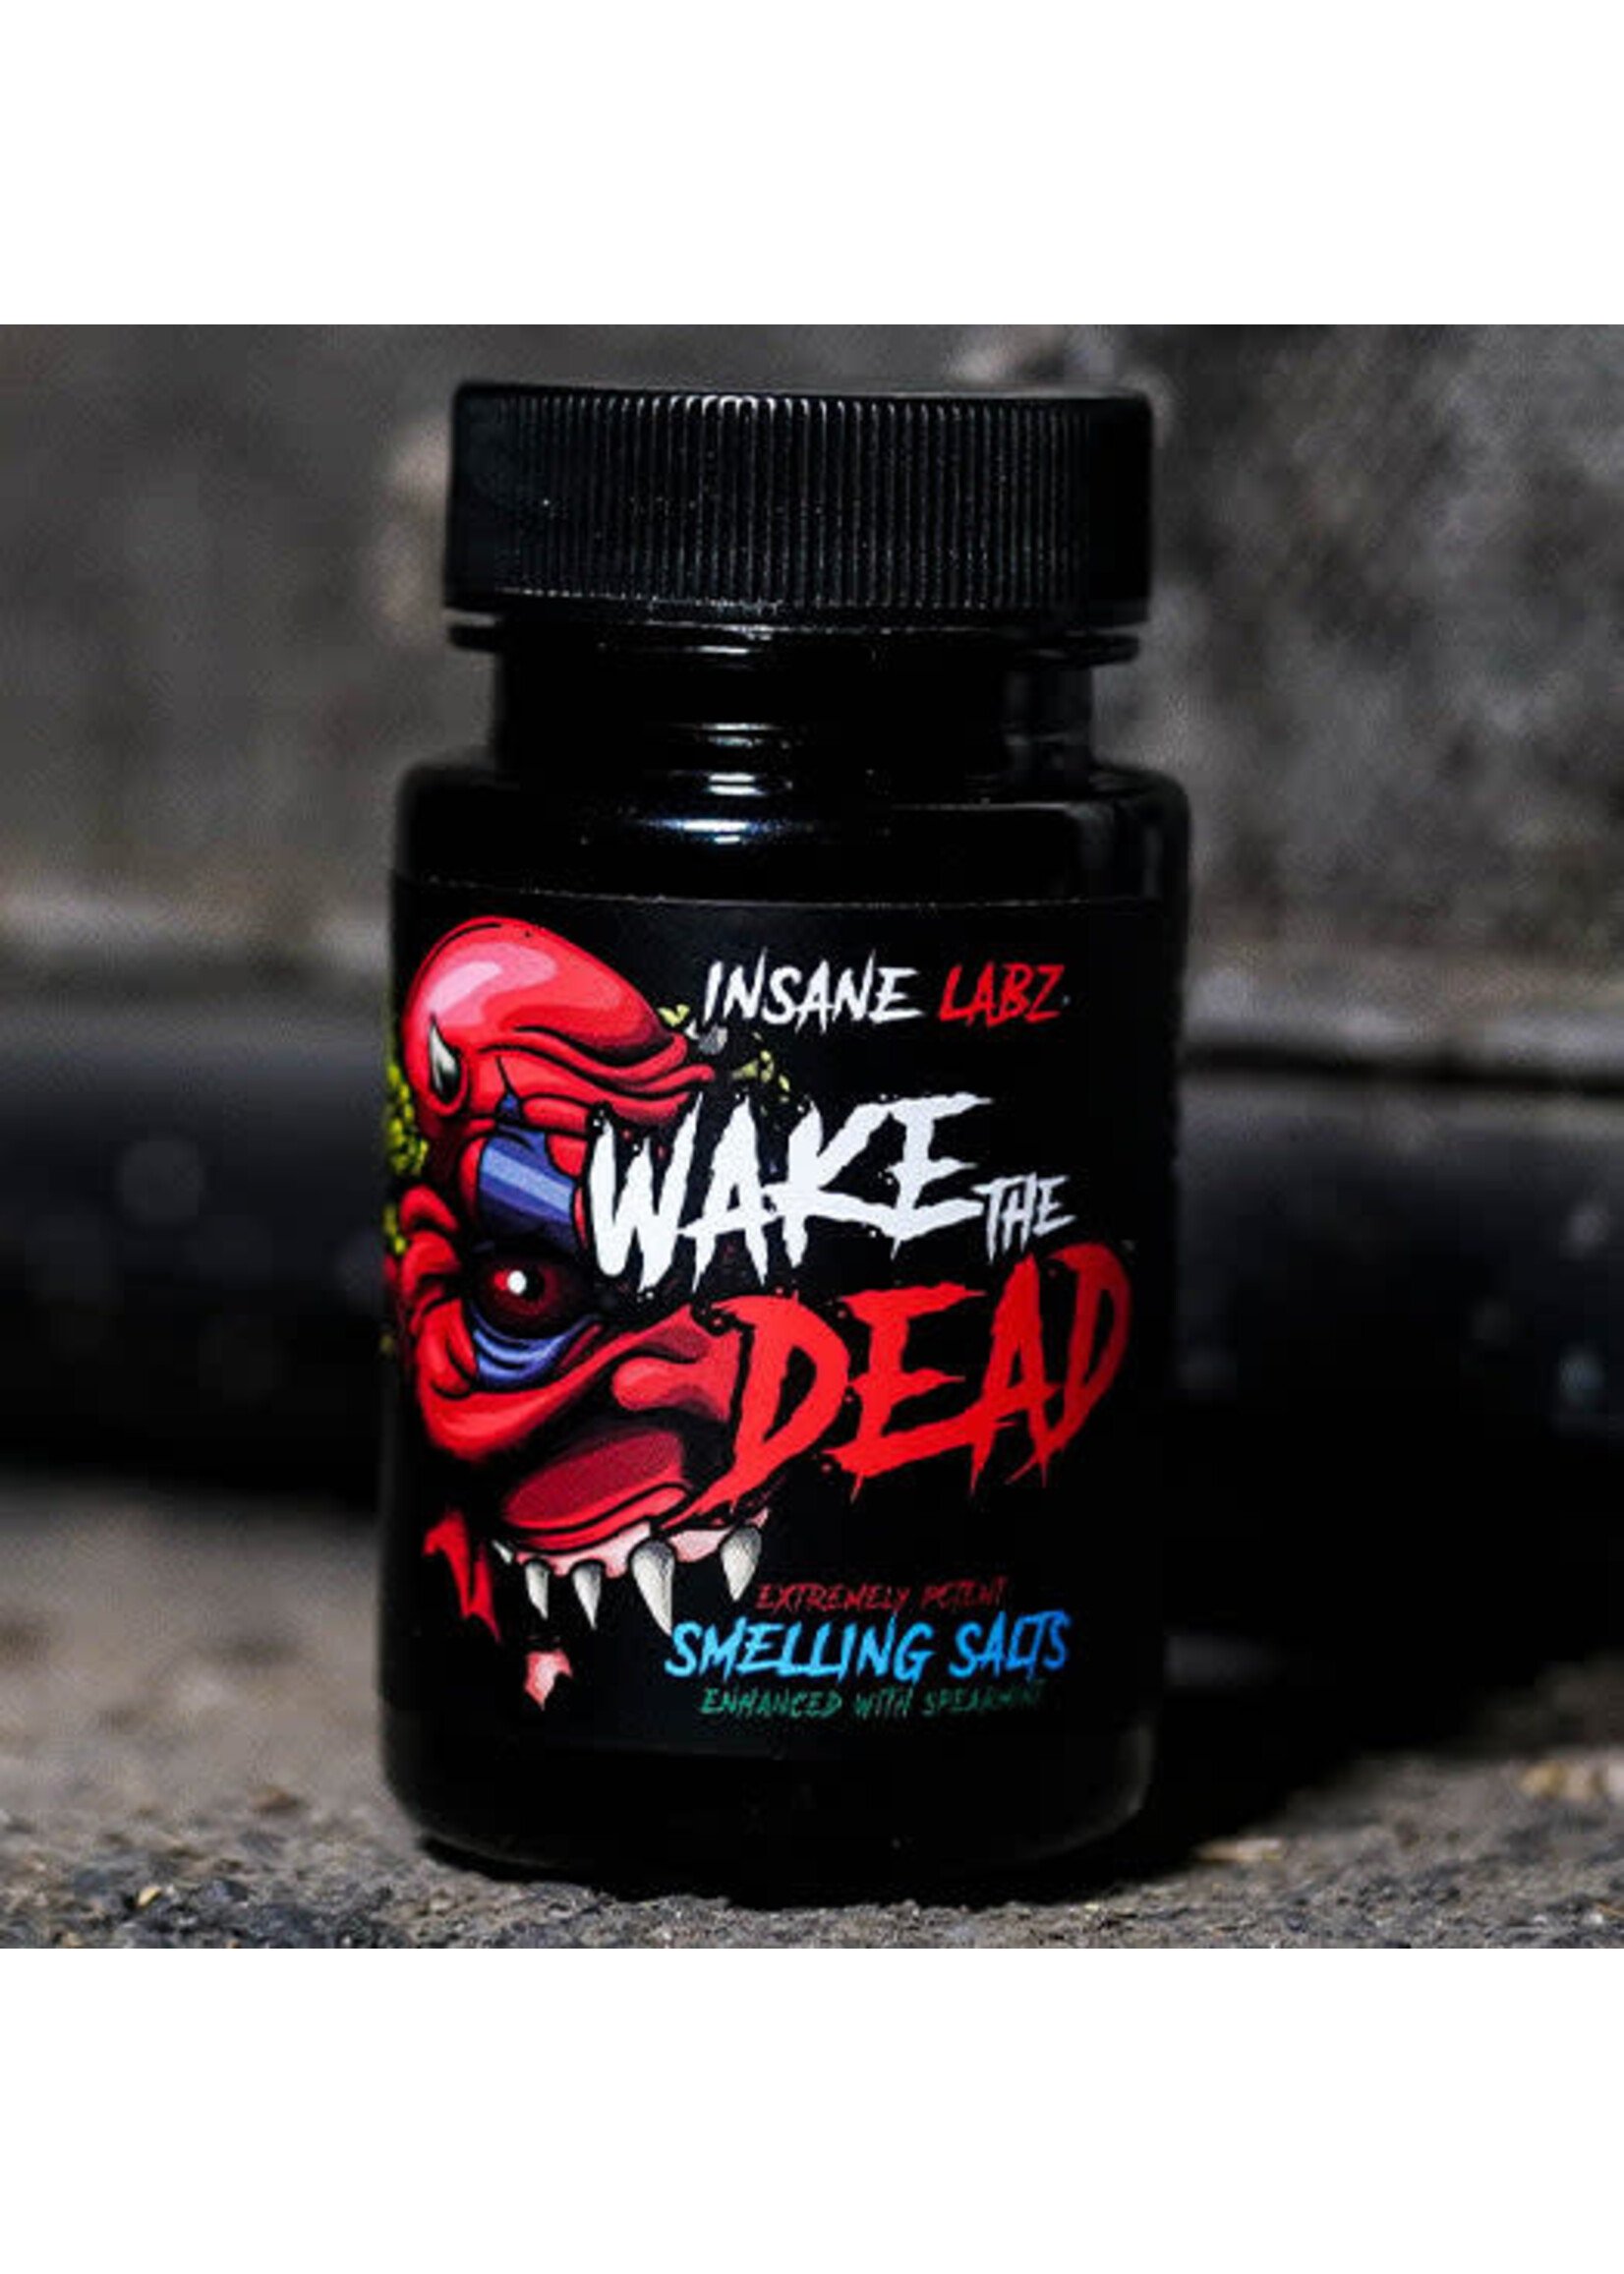 WAKE THE DEAD SMELLING SALTS - Rock's Discount Vitamins